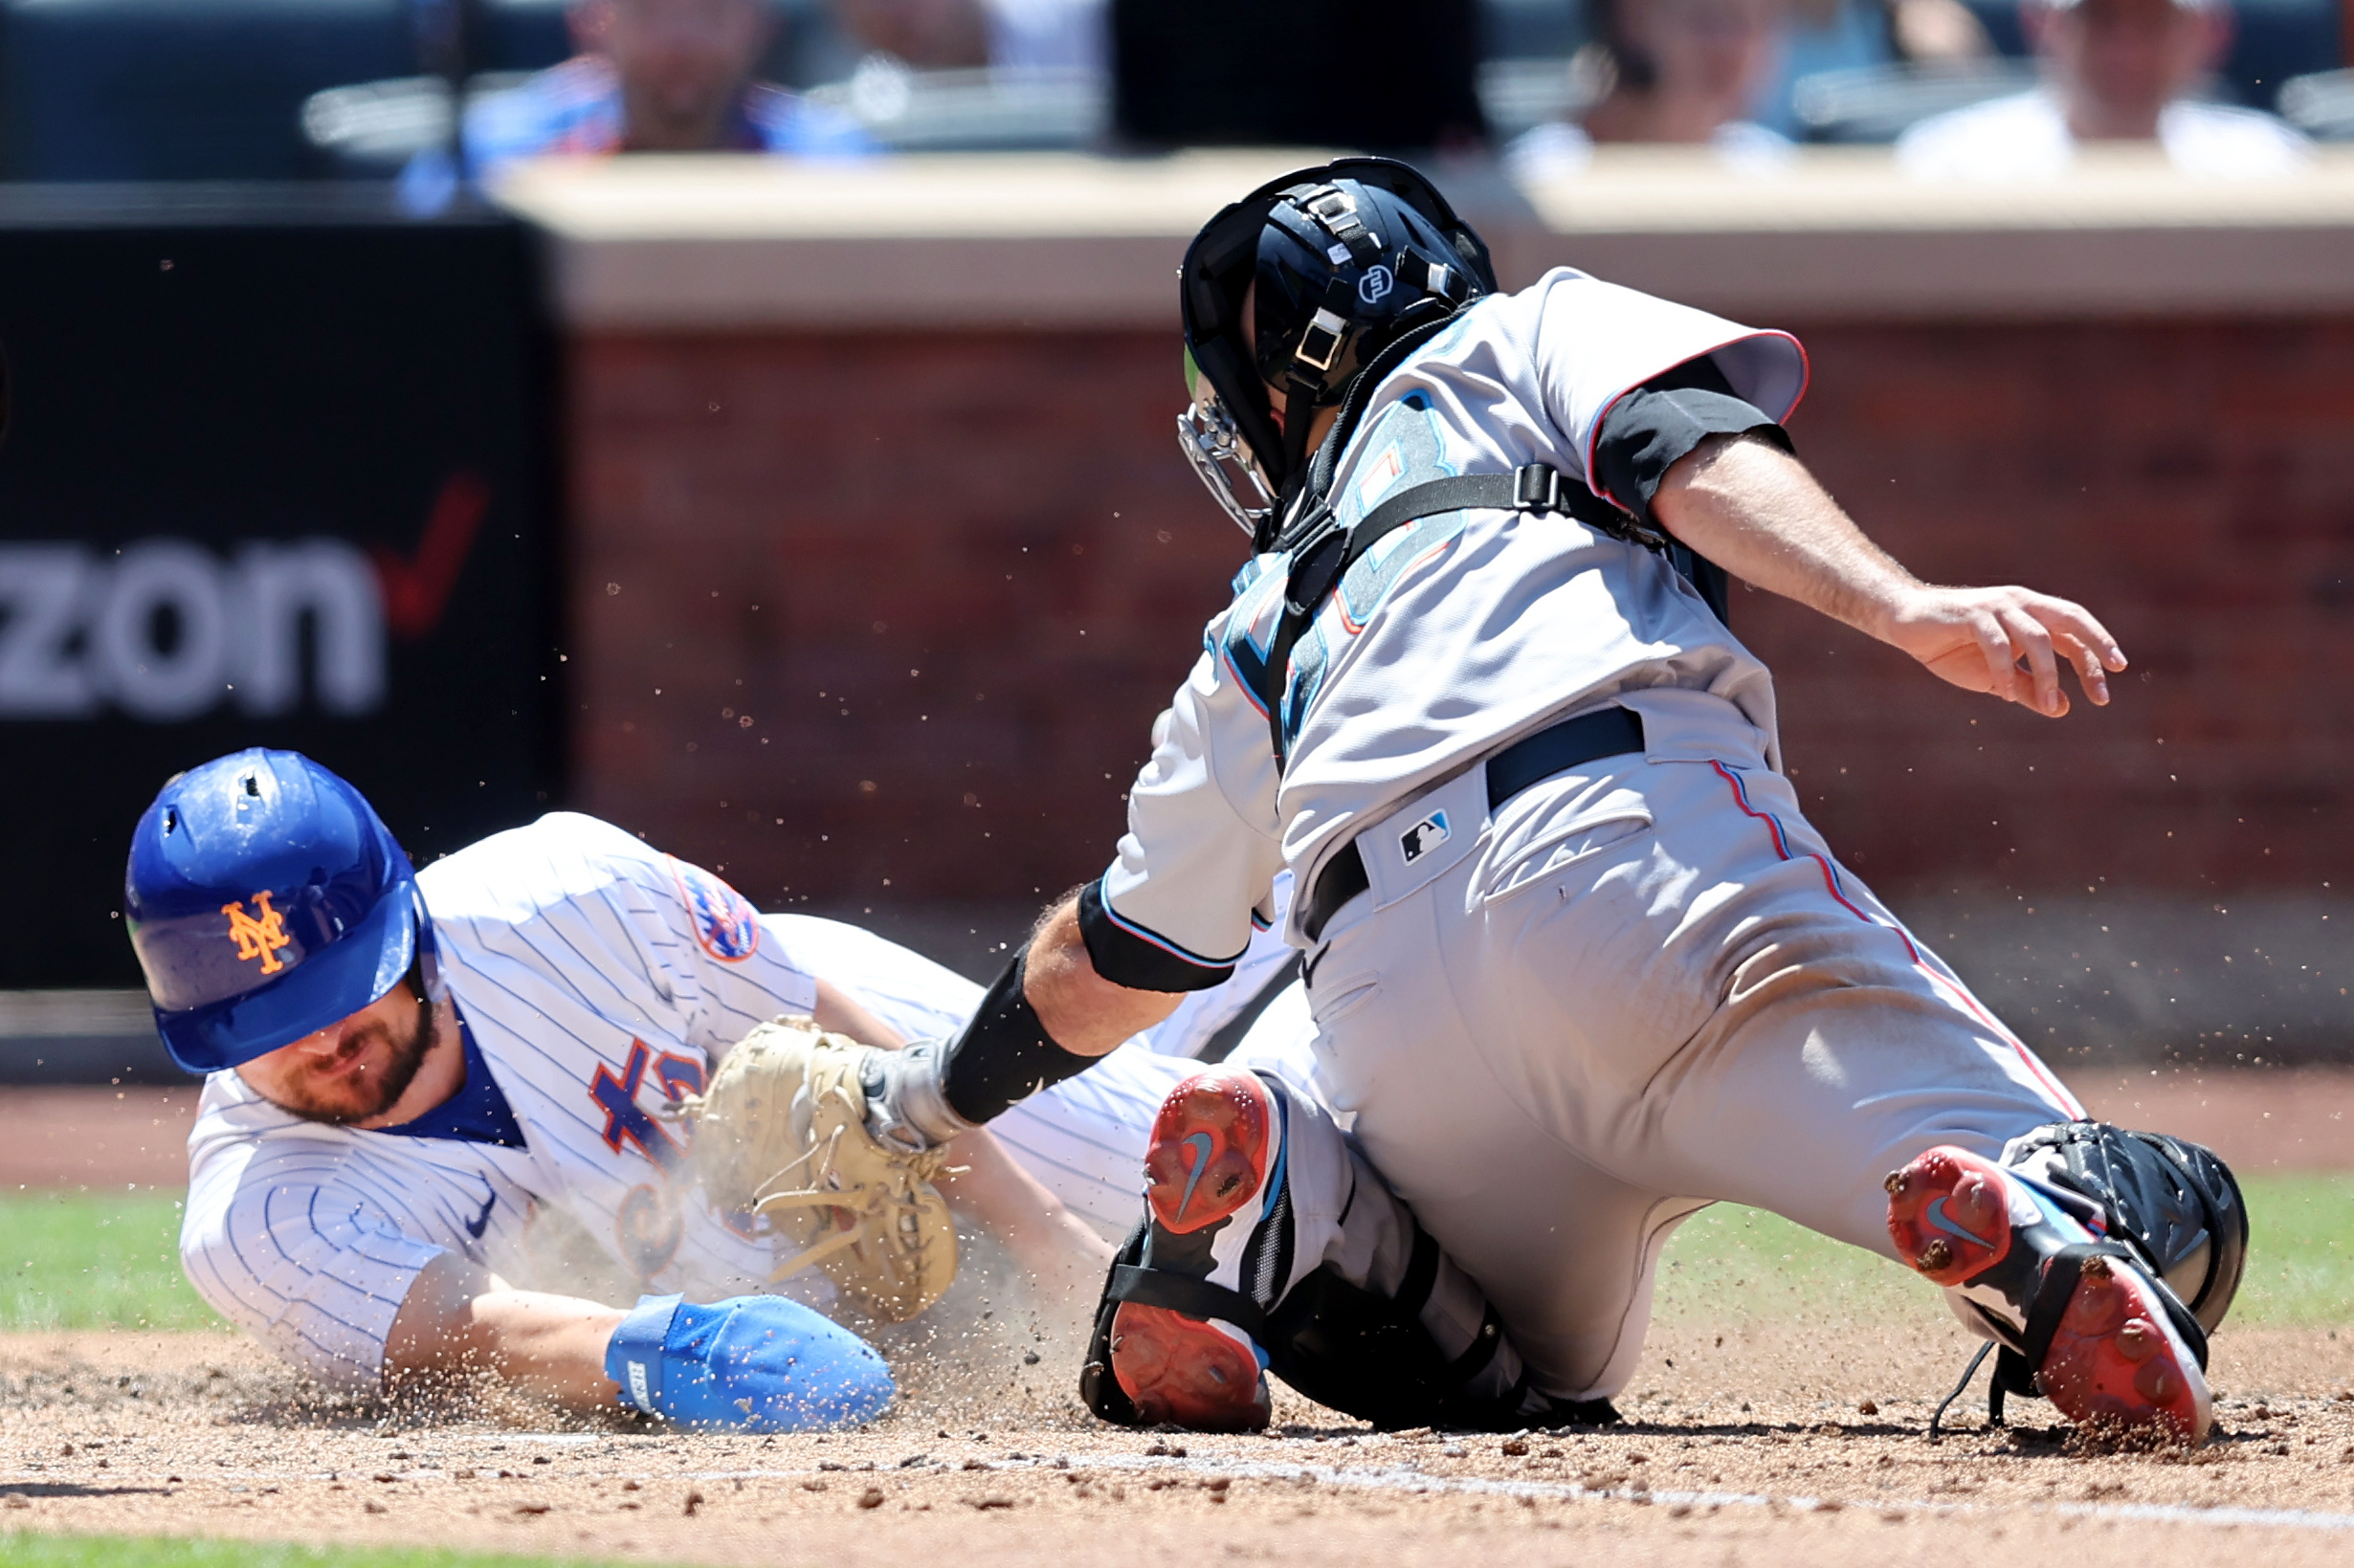 New York Mets designated hitter J.D. Davis (28) scores on a sacrifice fly by third baseman Eduardo Escobar (not pictured) ahead of the tag by Miami Marlins catcher Jacob Stallings (58) during the fourth inning at Citi Field.